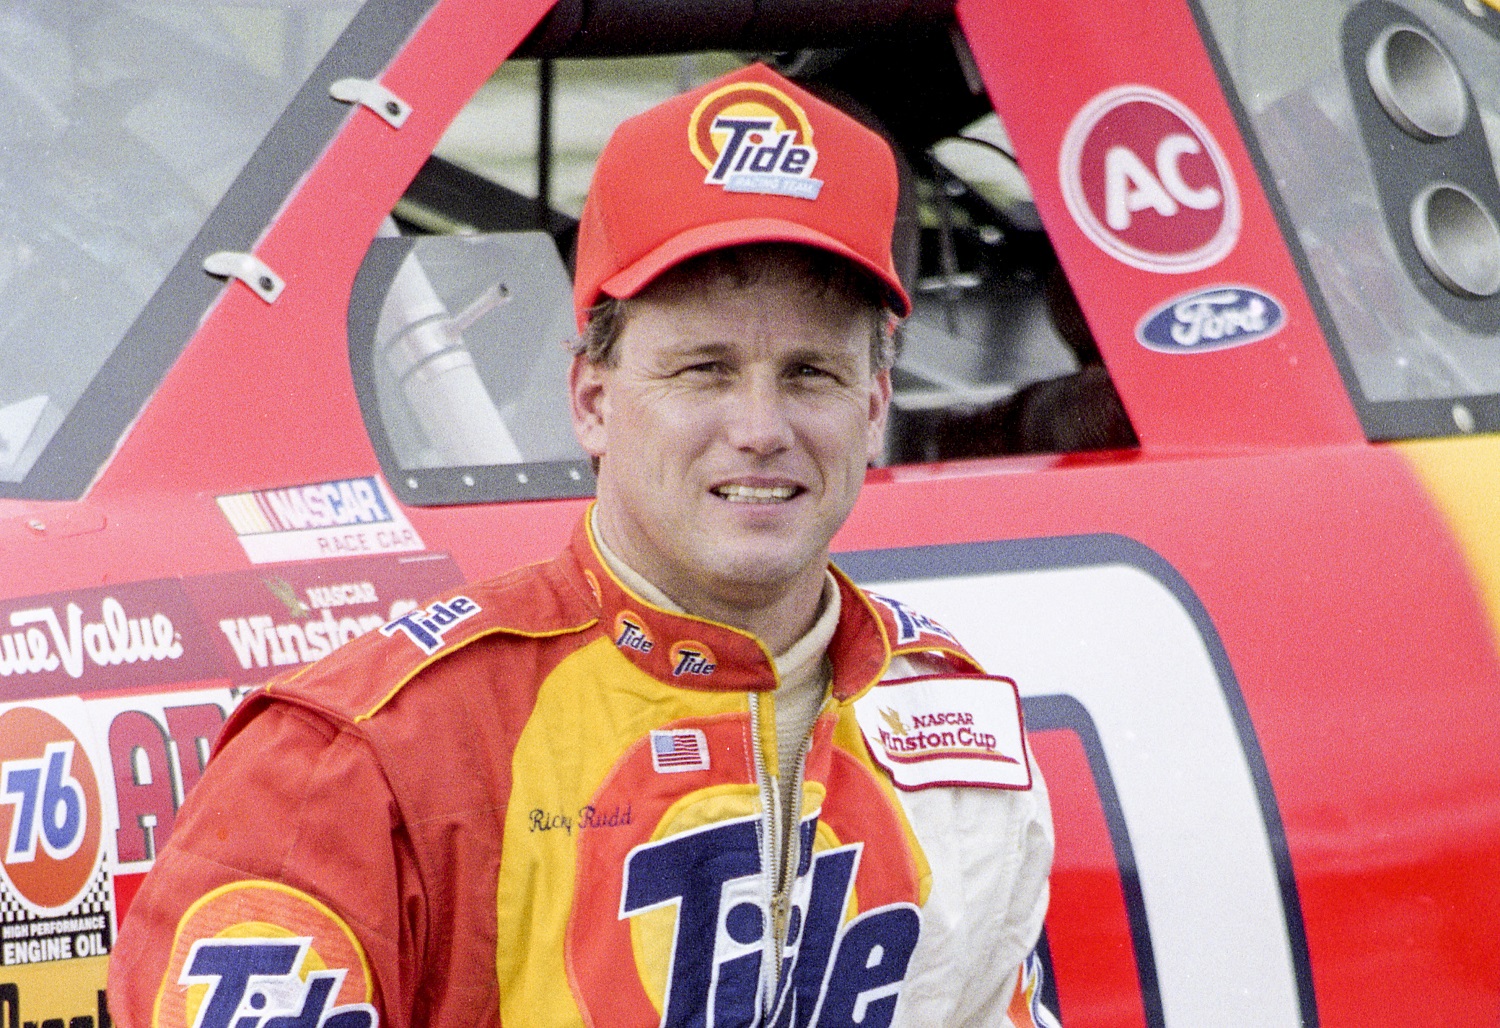 Ricky Rudd hadn't raced stock cars before entering his first NASCAR Cup series race in 1975 as an 18-year-old. | Brian Cleary/Getty Images